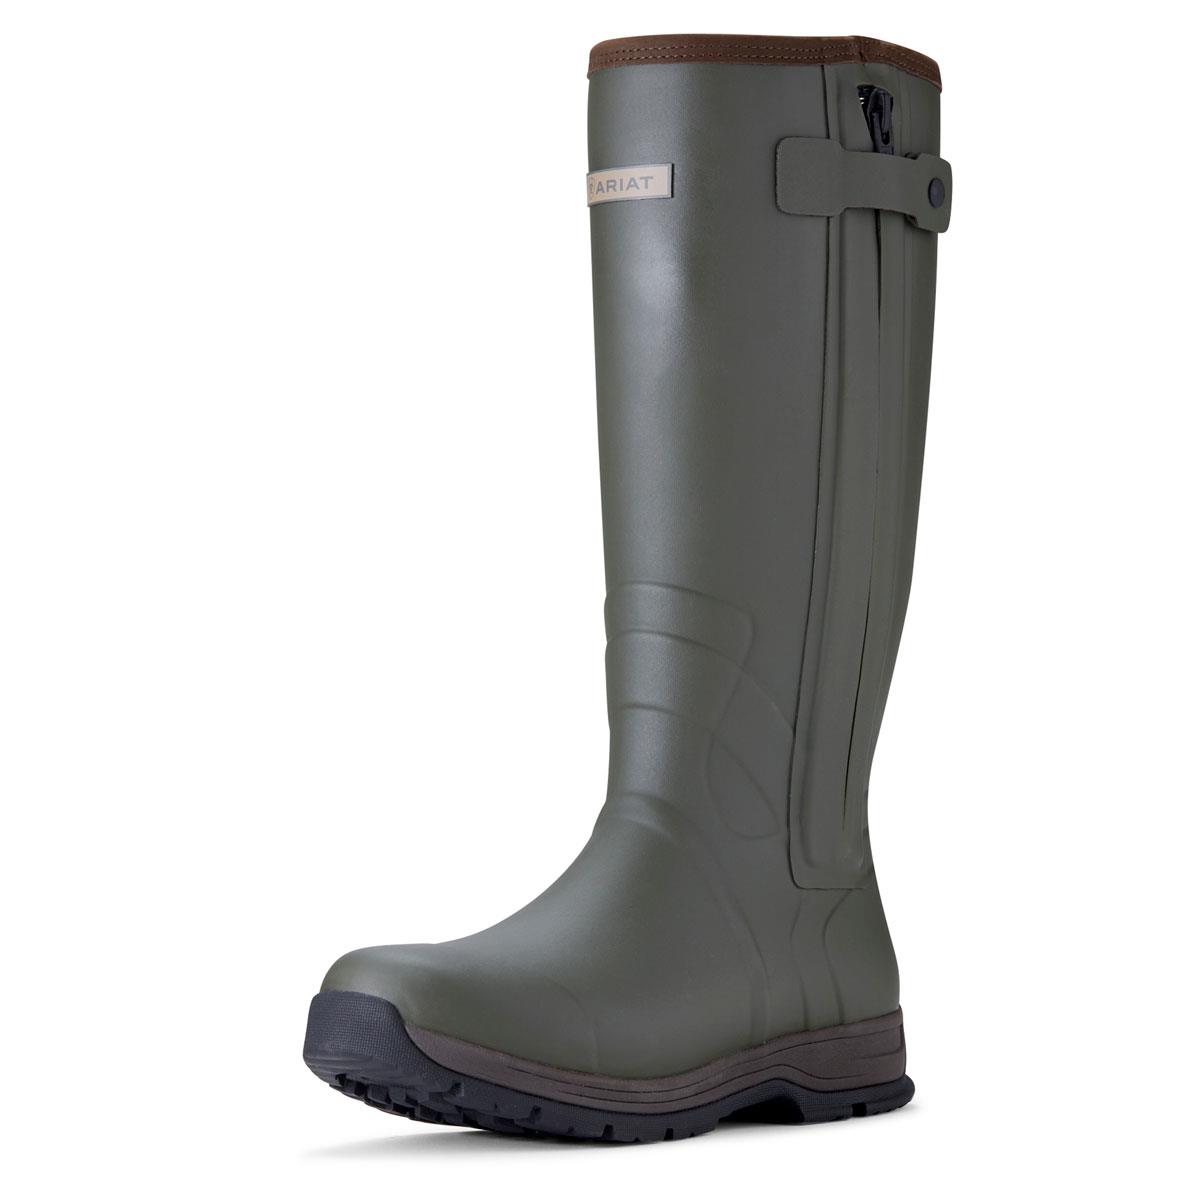 Can water seep through the zip of Ariat Men's Burford Boots when wading?